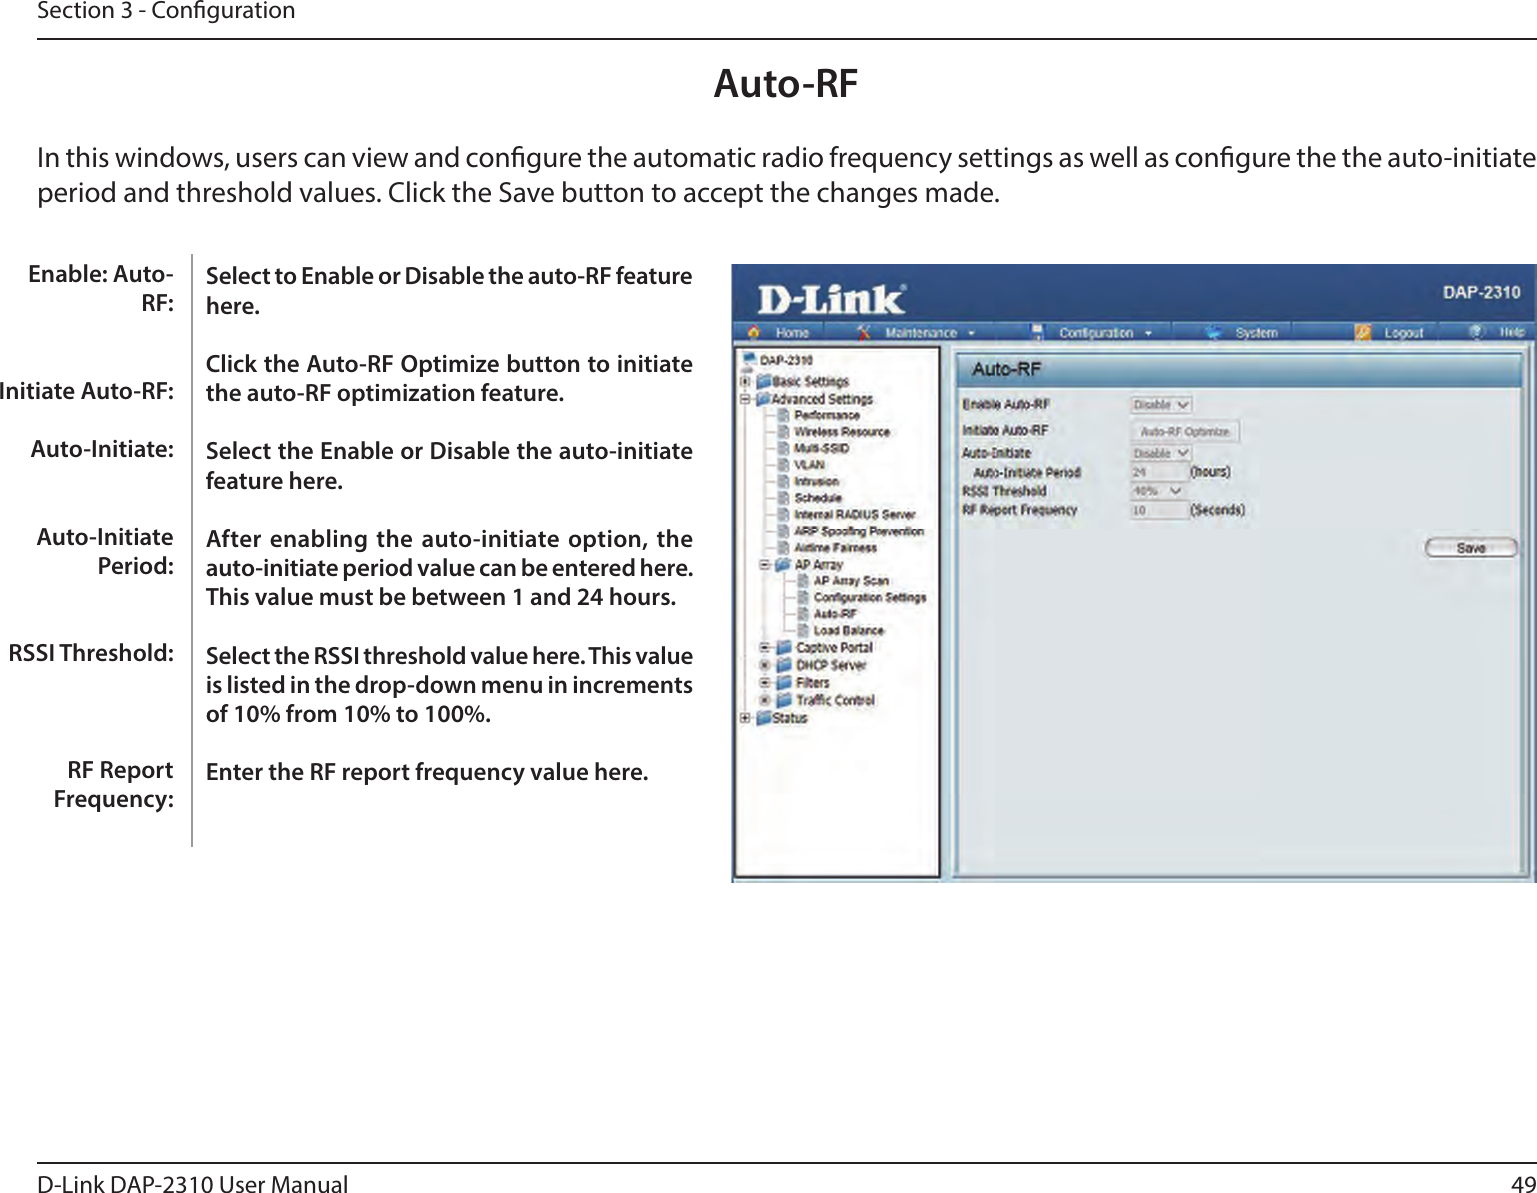 49D-Link DAP-2310 User ManualSection 3 - CongurationAuto-RFIn this windows, users can view and congure the automatic radio frequency settings as well as congure the the auto-initiate period and threshold values. Click the Save button to accept the changes made.Select to Enable or Disable the auto-RF feature here.Click the Auto-RF Optimize button to initiate the auto-RF optimization feature.Select the Enable or Disable the auto-initiate feature here.After enabling  the auto-initiate option,  the auto-initiate period value can be entered here. This value must be between 1 and 24 hours.Select the RSSI threshold value here. This value is listed in the drop-down menu in increments of 10% from 10% to 100%.Enter the RF report frequency value here. Enable: Auto-RF:Initiate Auto-RF:Auto-Initiate:Auto-Initiate Period:RSSI Threshold:RF Report Frequency: